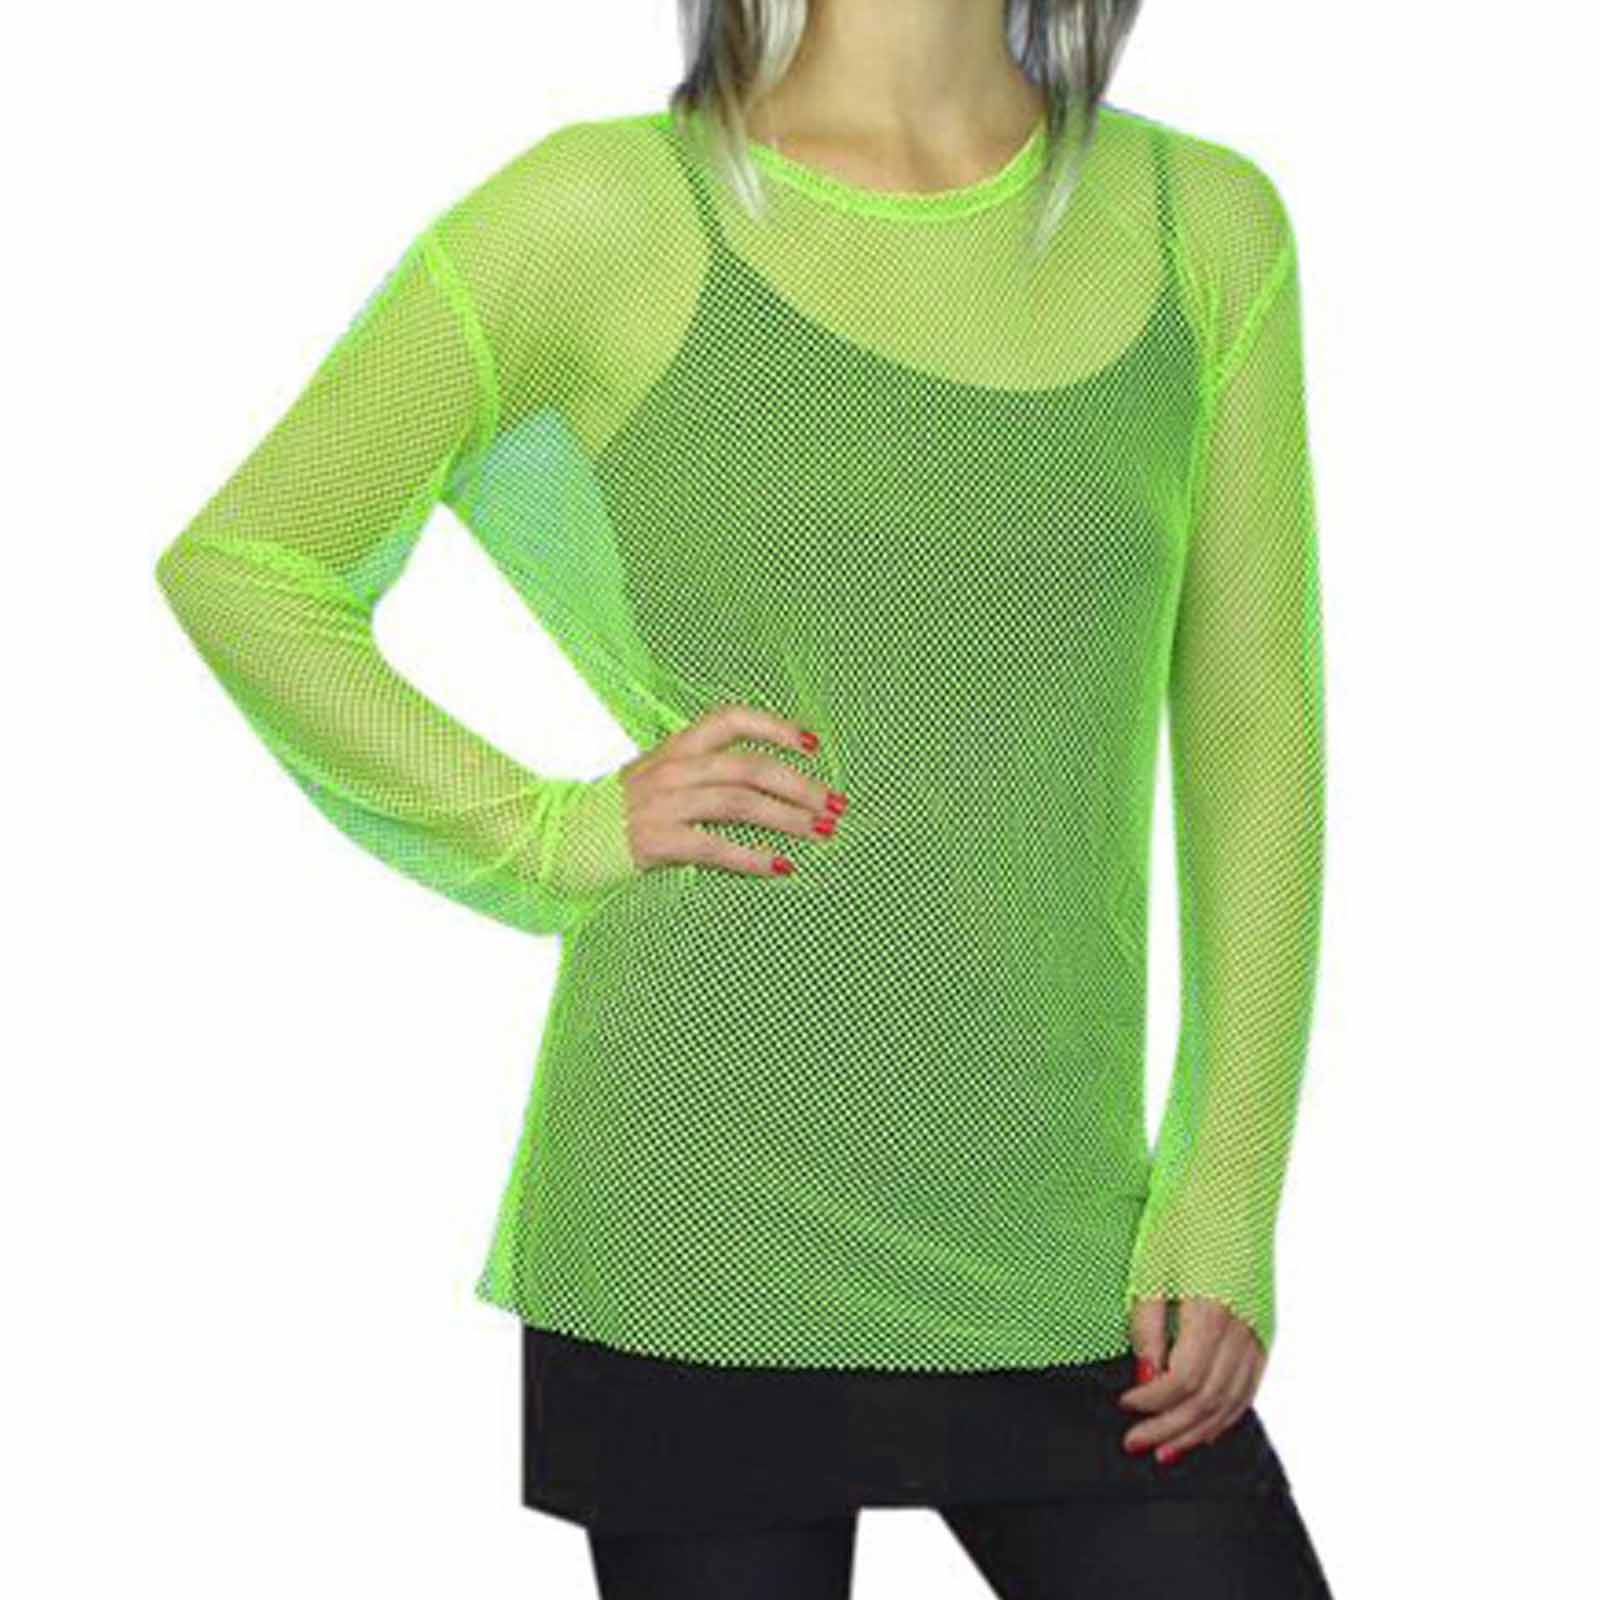 Derved Styring momentum 80s Fishnet Top (Adult Size) - Neon Green